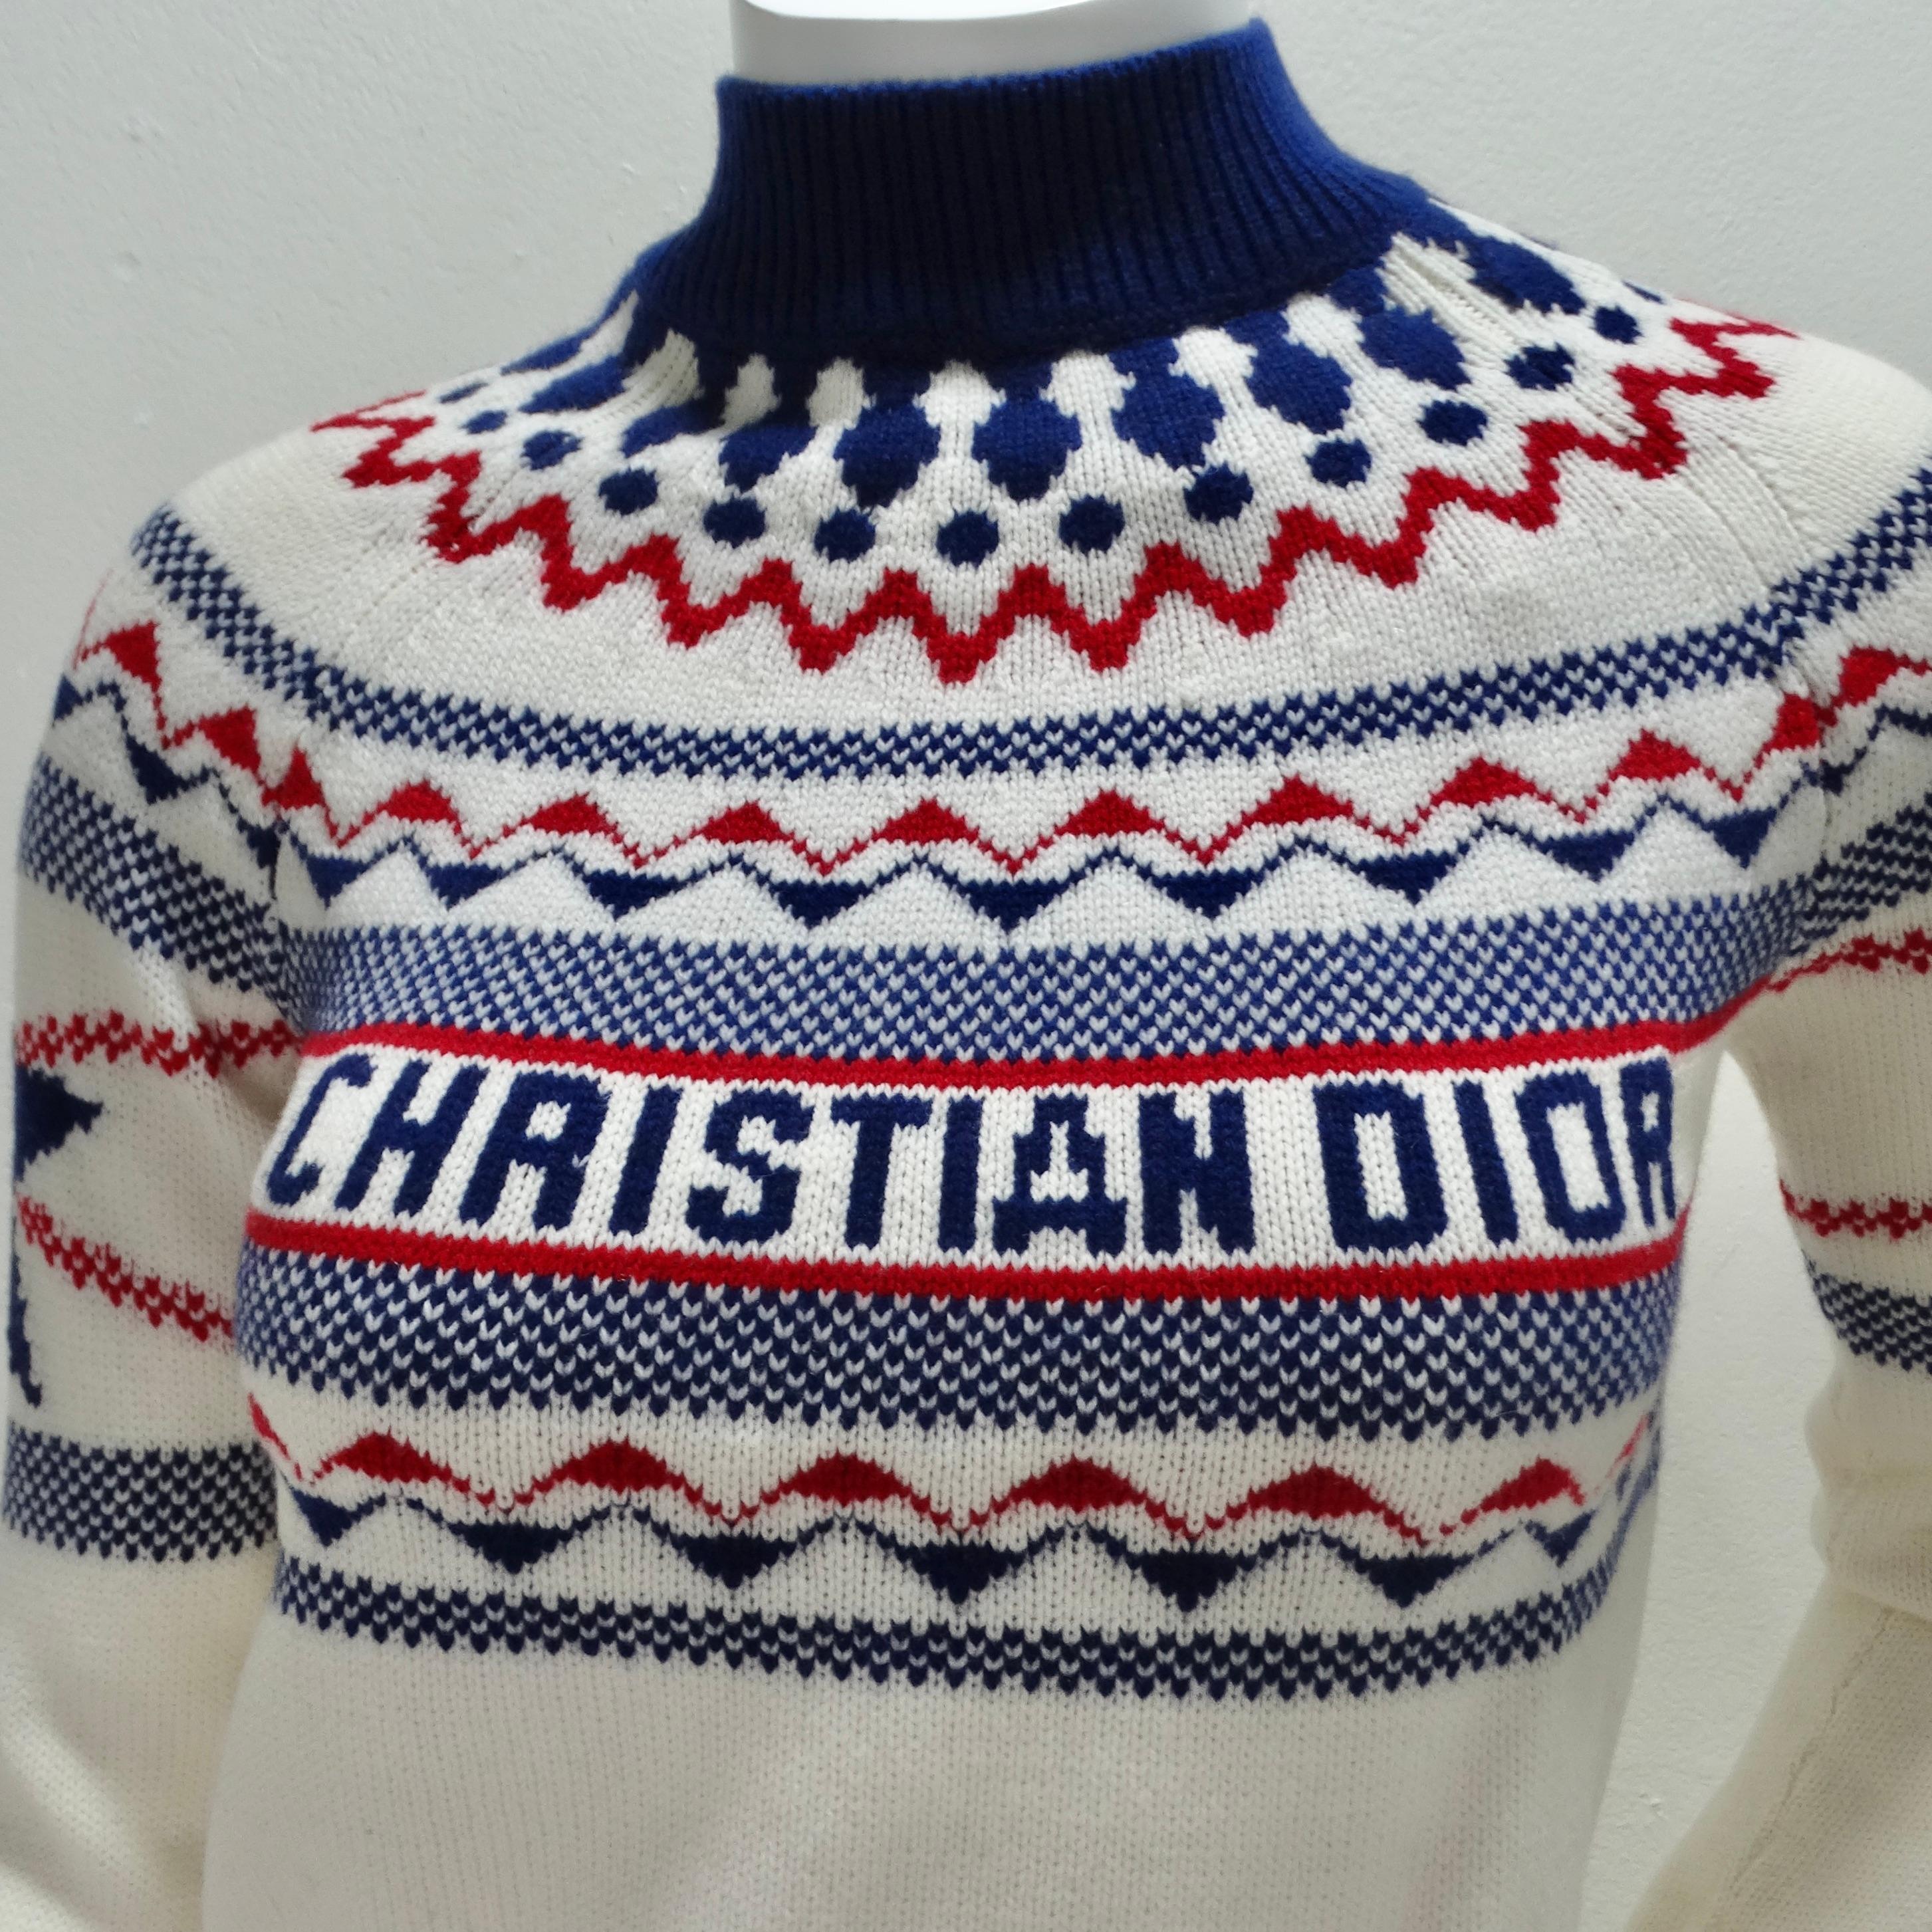 Experience the epitome of luxury with the Christian Dior Cashmere Knit Sweater. Crafted from a blend of 70% wool and 30% cashmere, this white knit sweater envelops you in warmth and comfort. The navy and red stripes, accompanied by navy stars on the